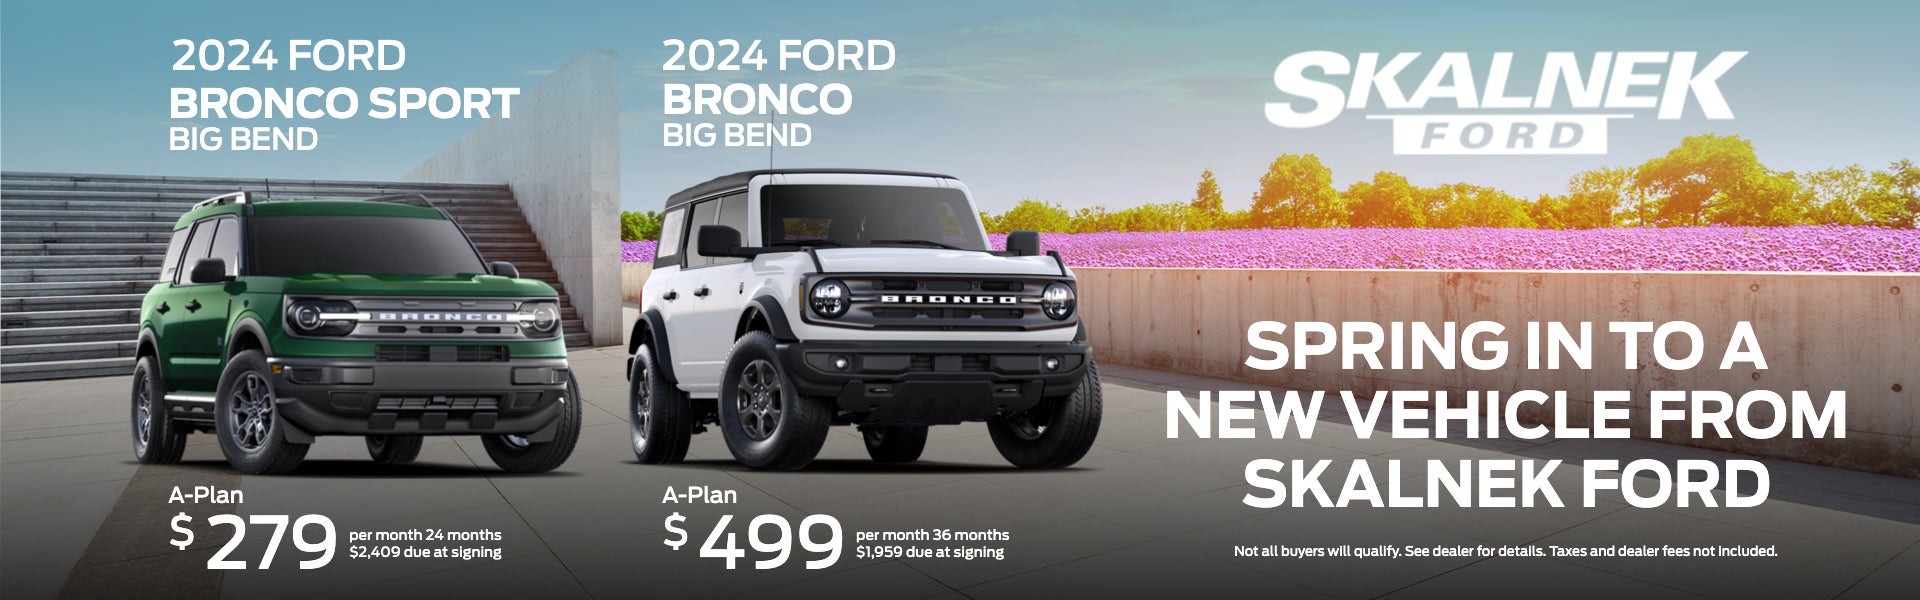 Spring in to a new vehicle from Skalnek Ford